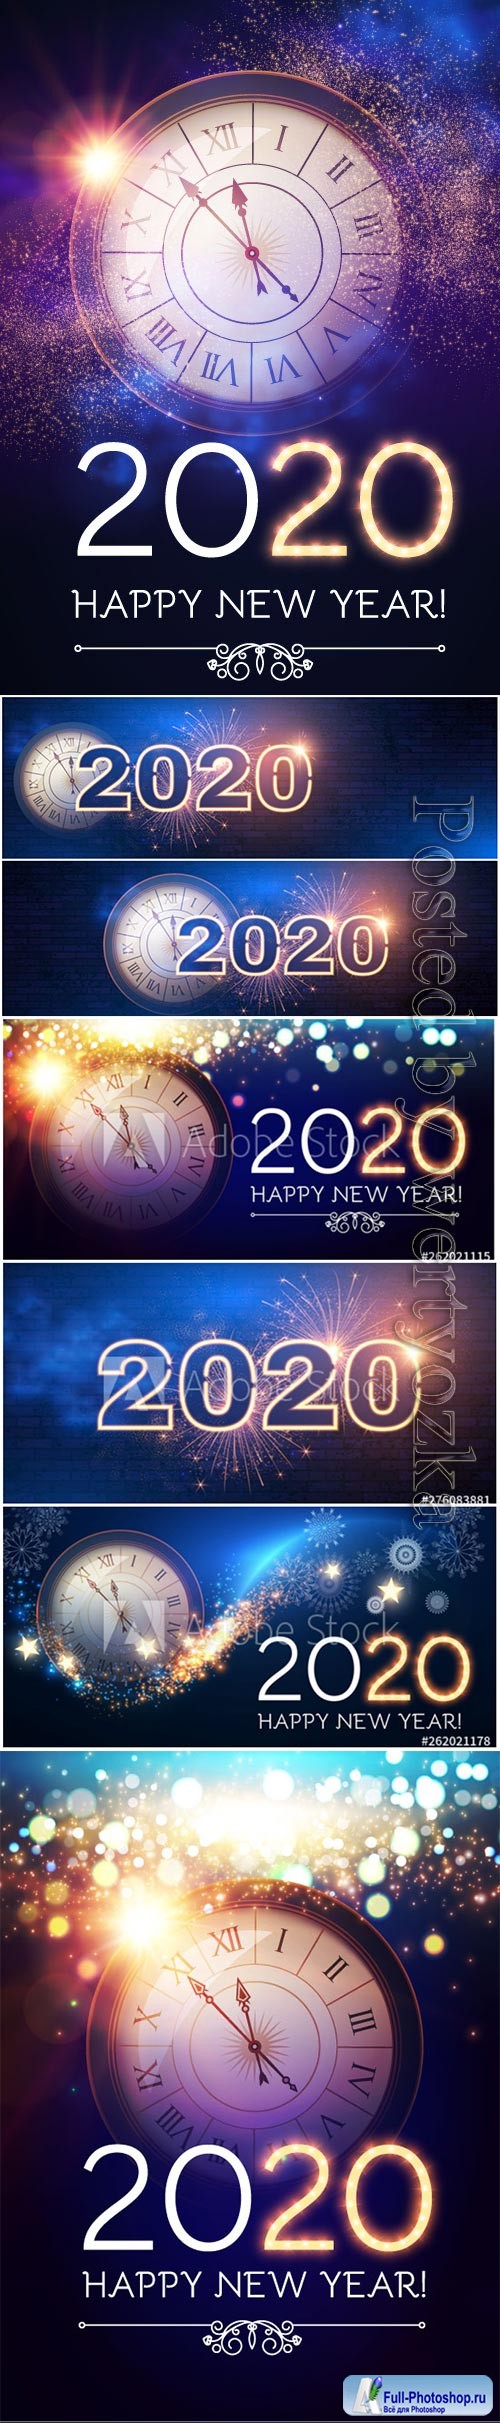 2020 Christmas and New Year vector backgrounds with clock 